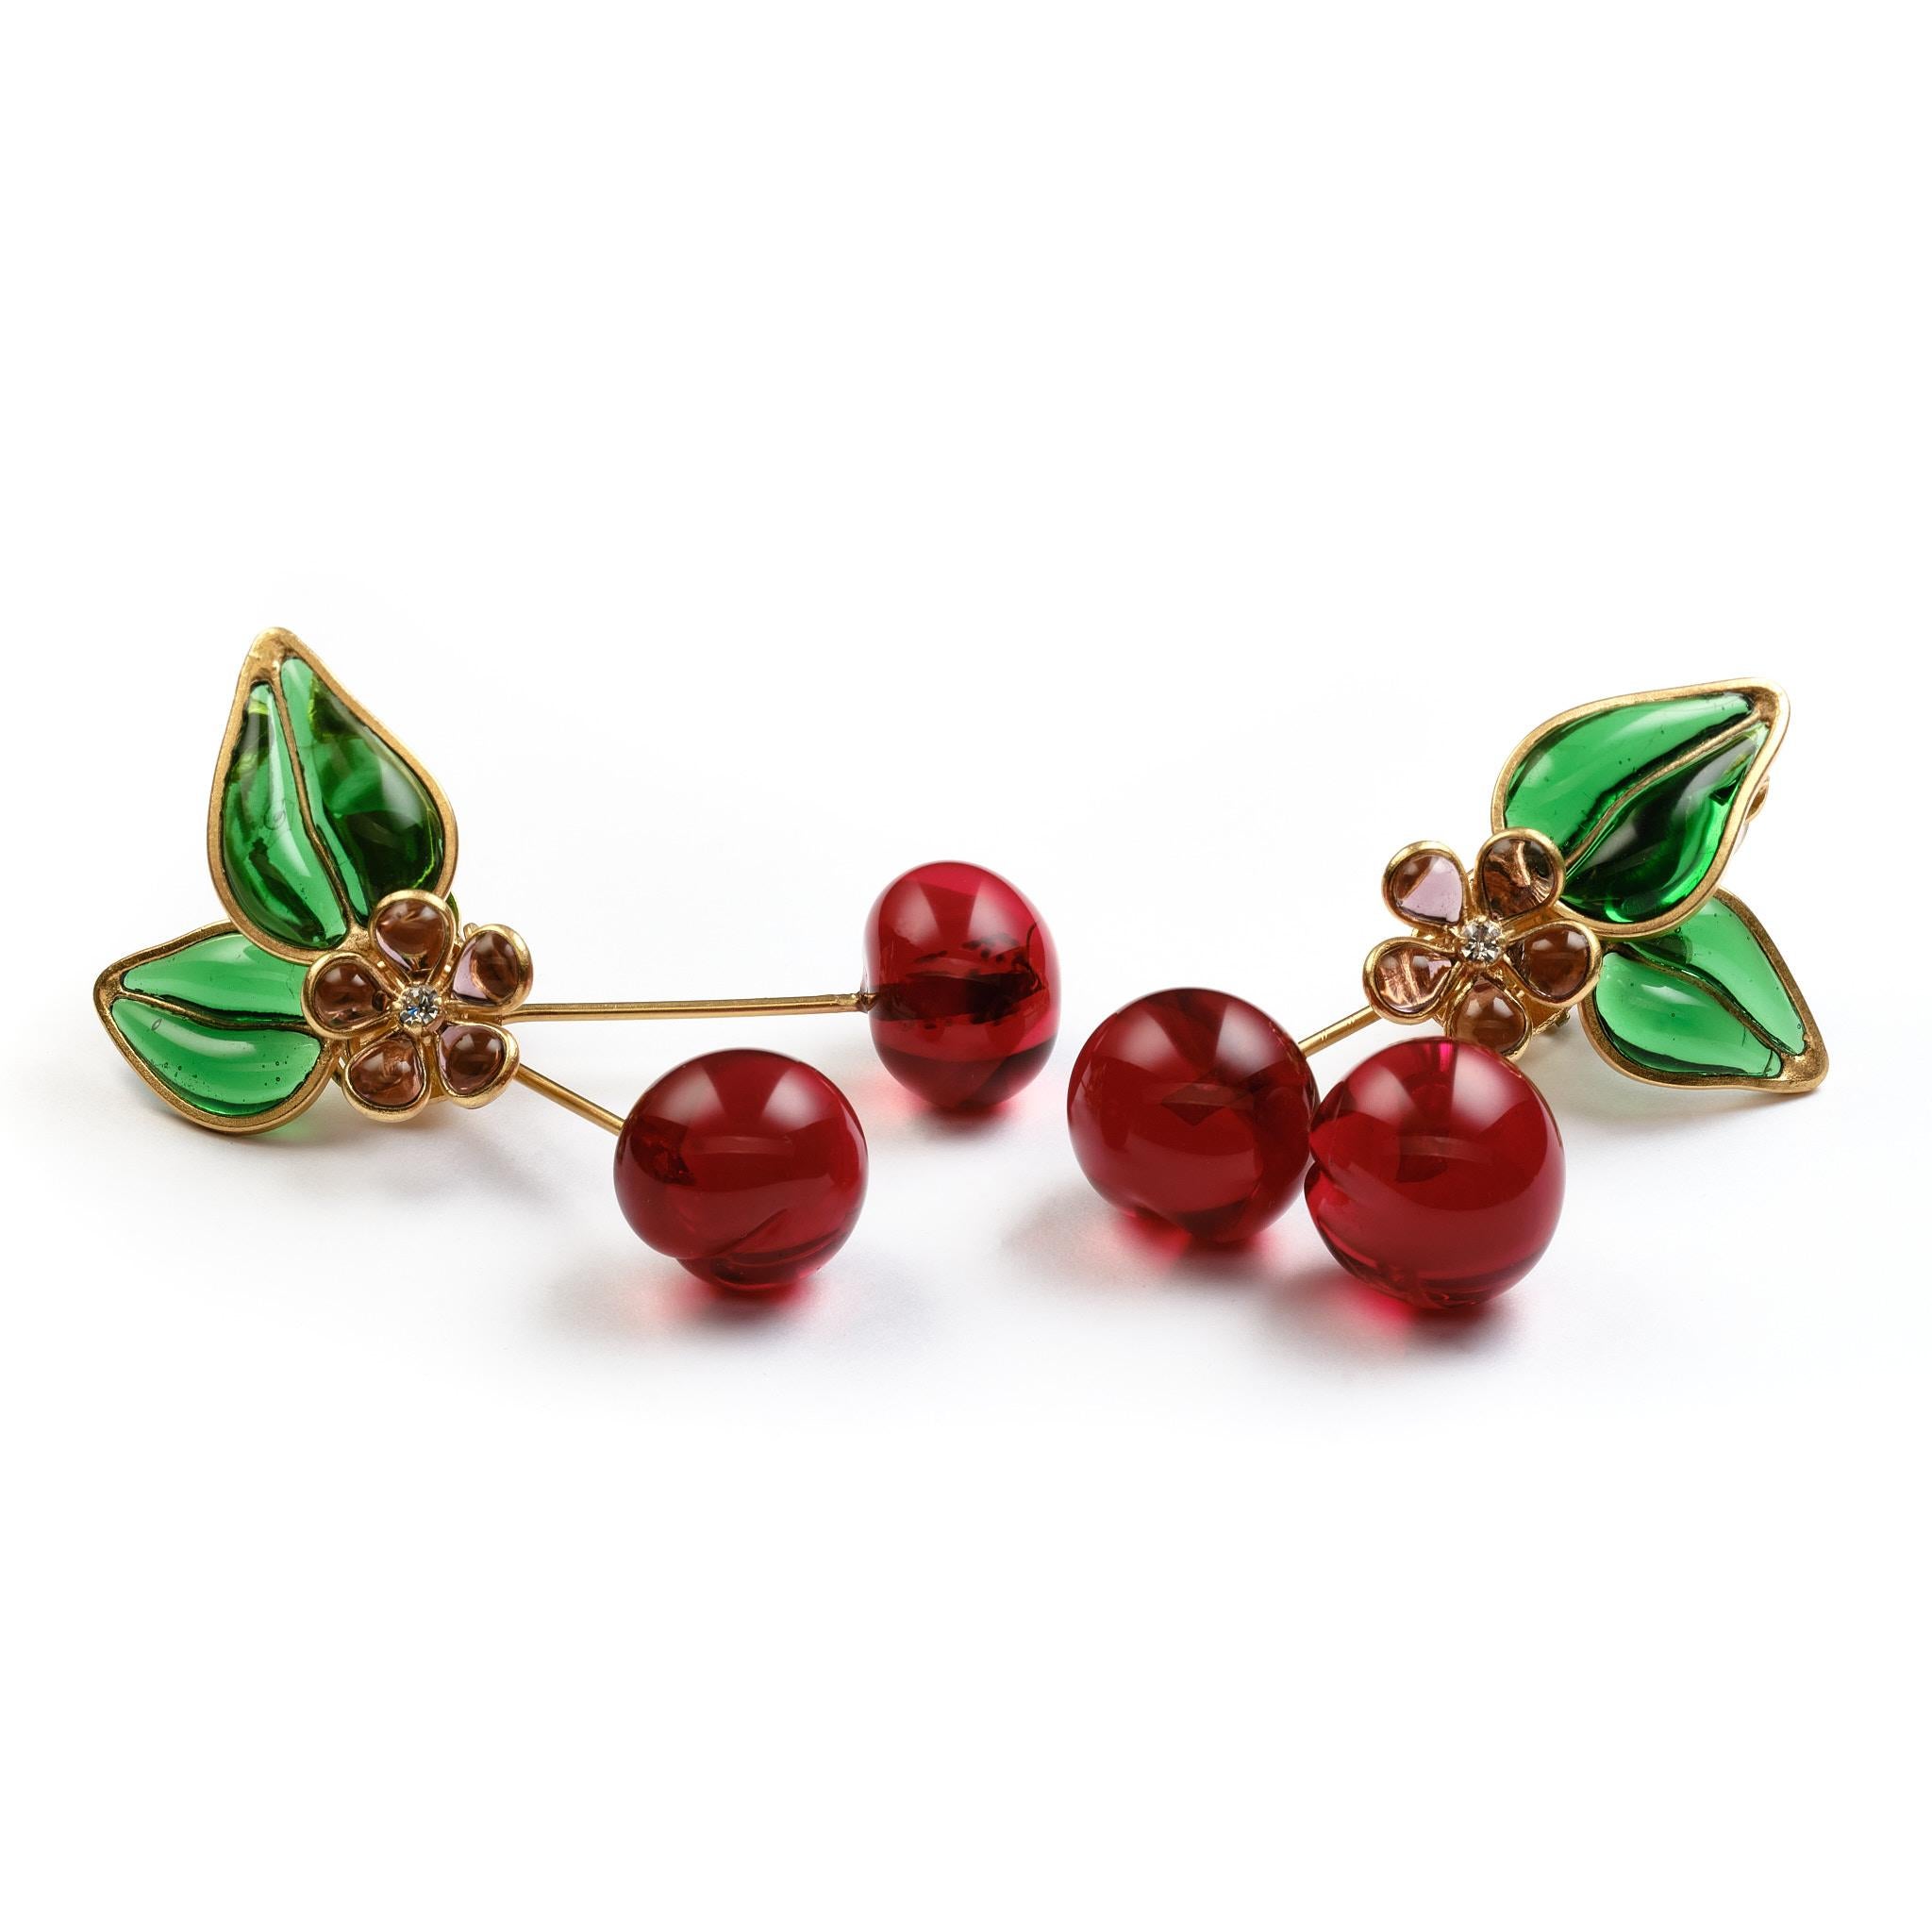 Beautiful and unique  Chanel ear clips in the shape of a pair of cherries with green leaves and a cherry blossom. These ear clips were made by Gripoix Paris in the 1970s and are very rare.
Measurement: Full length 6 cm/2,36 